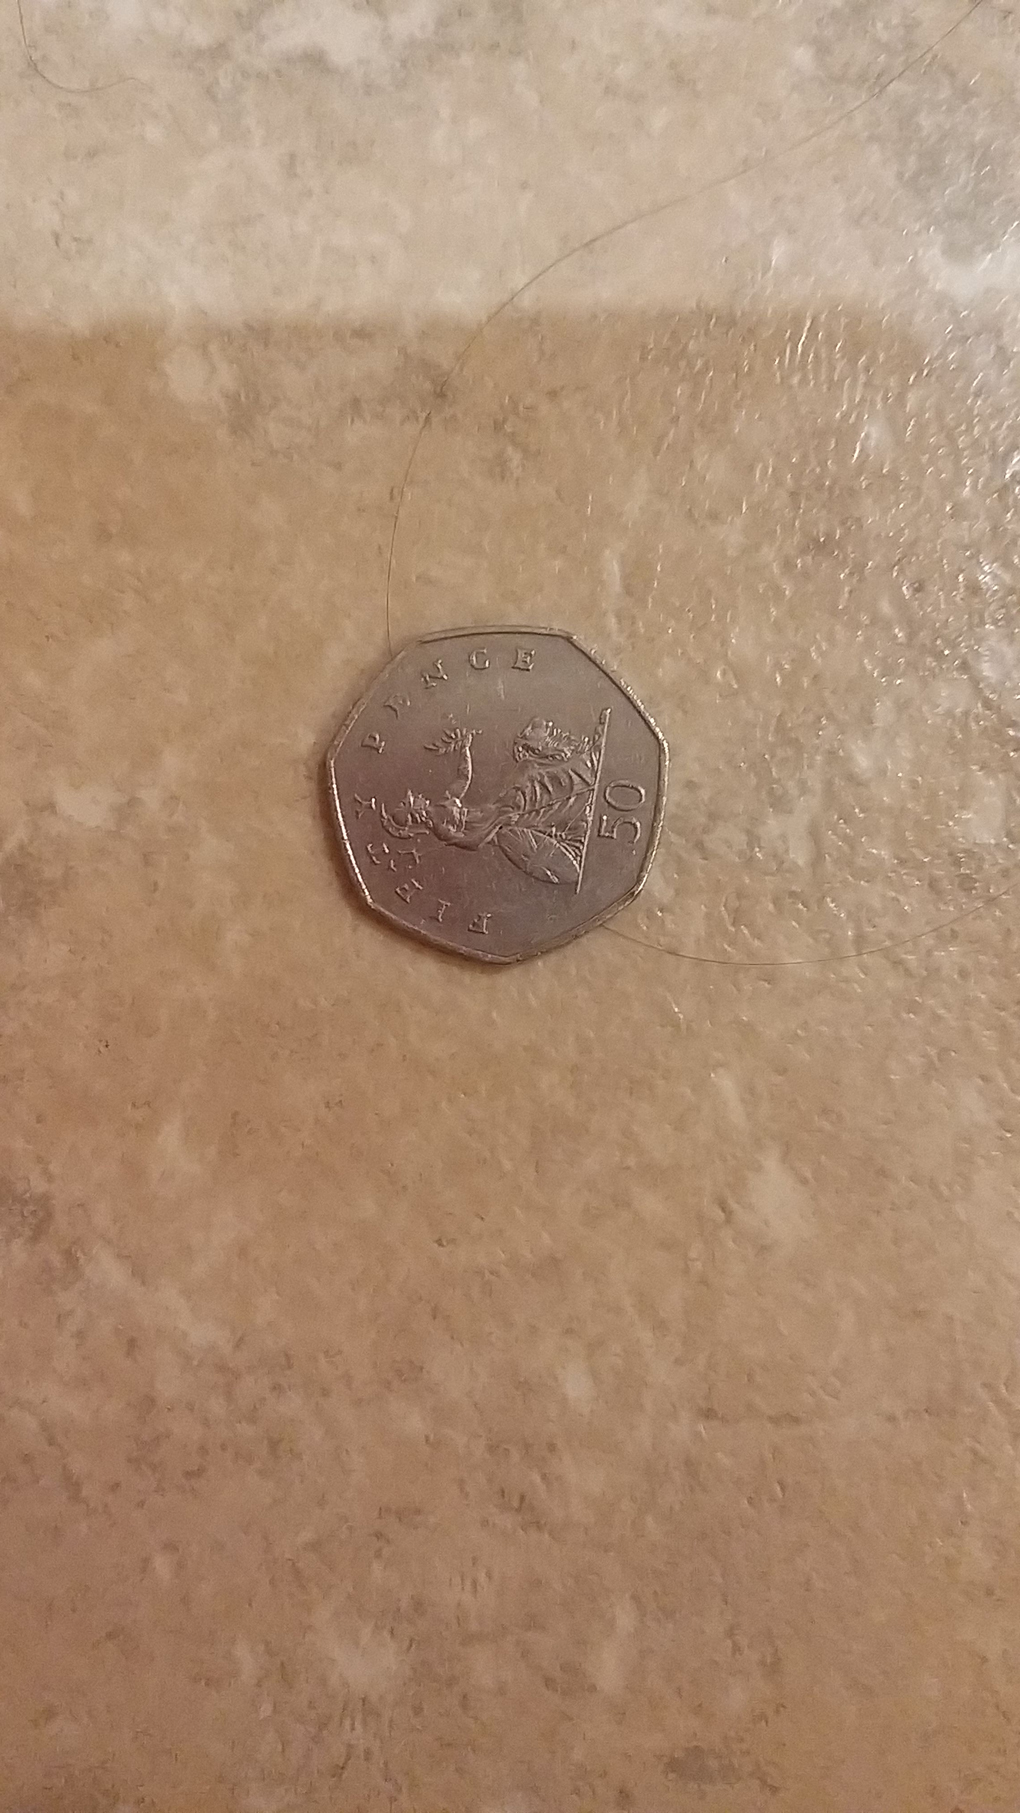 50p coin tails up